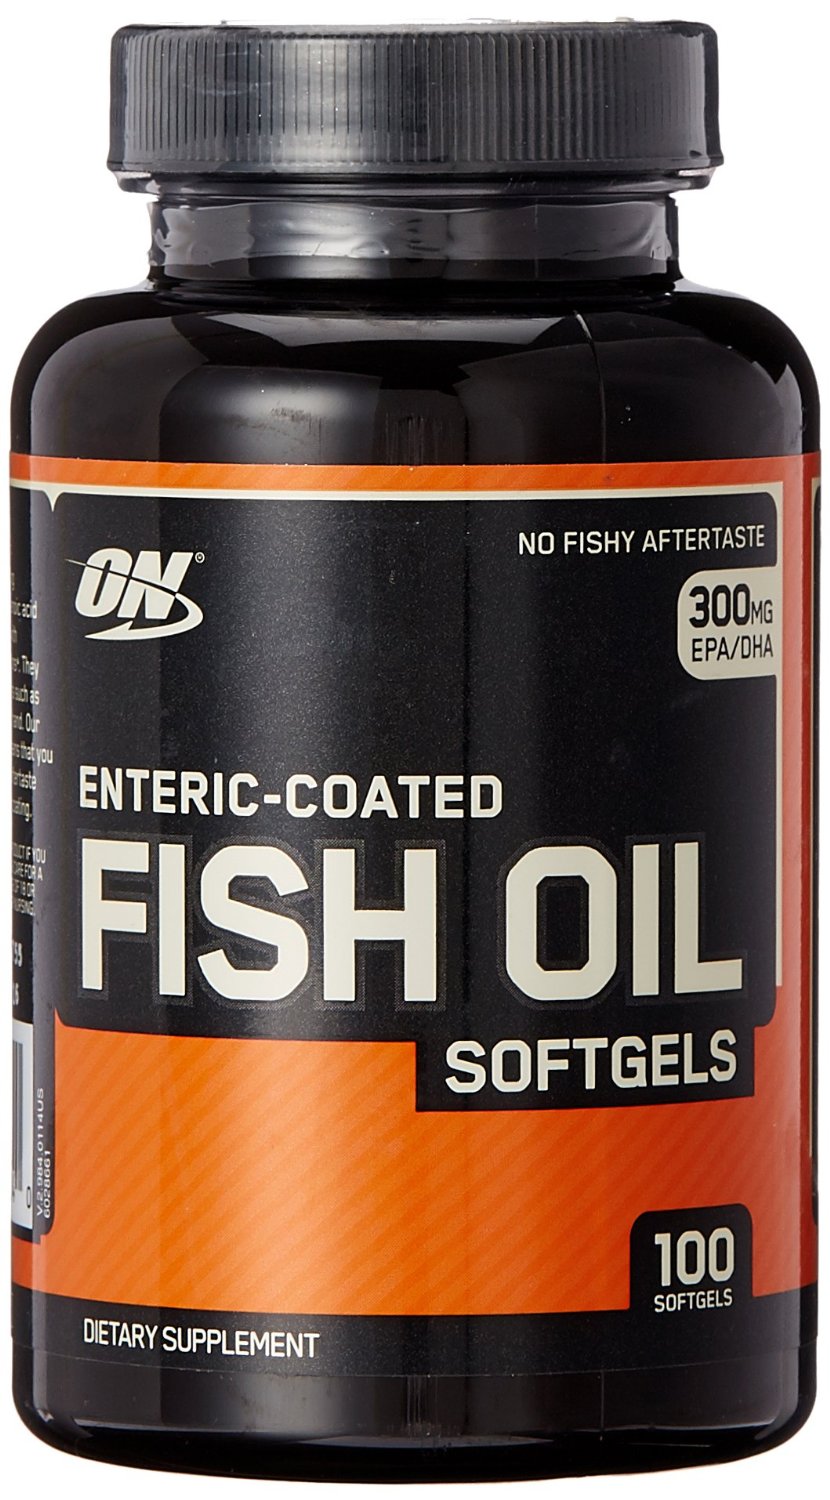 https://www.indianbodybuilding.co.in/products/wp-content/uploads/2017/02/optimum-nutrition-on-fish-oil-100-softgels-2.jpg